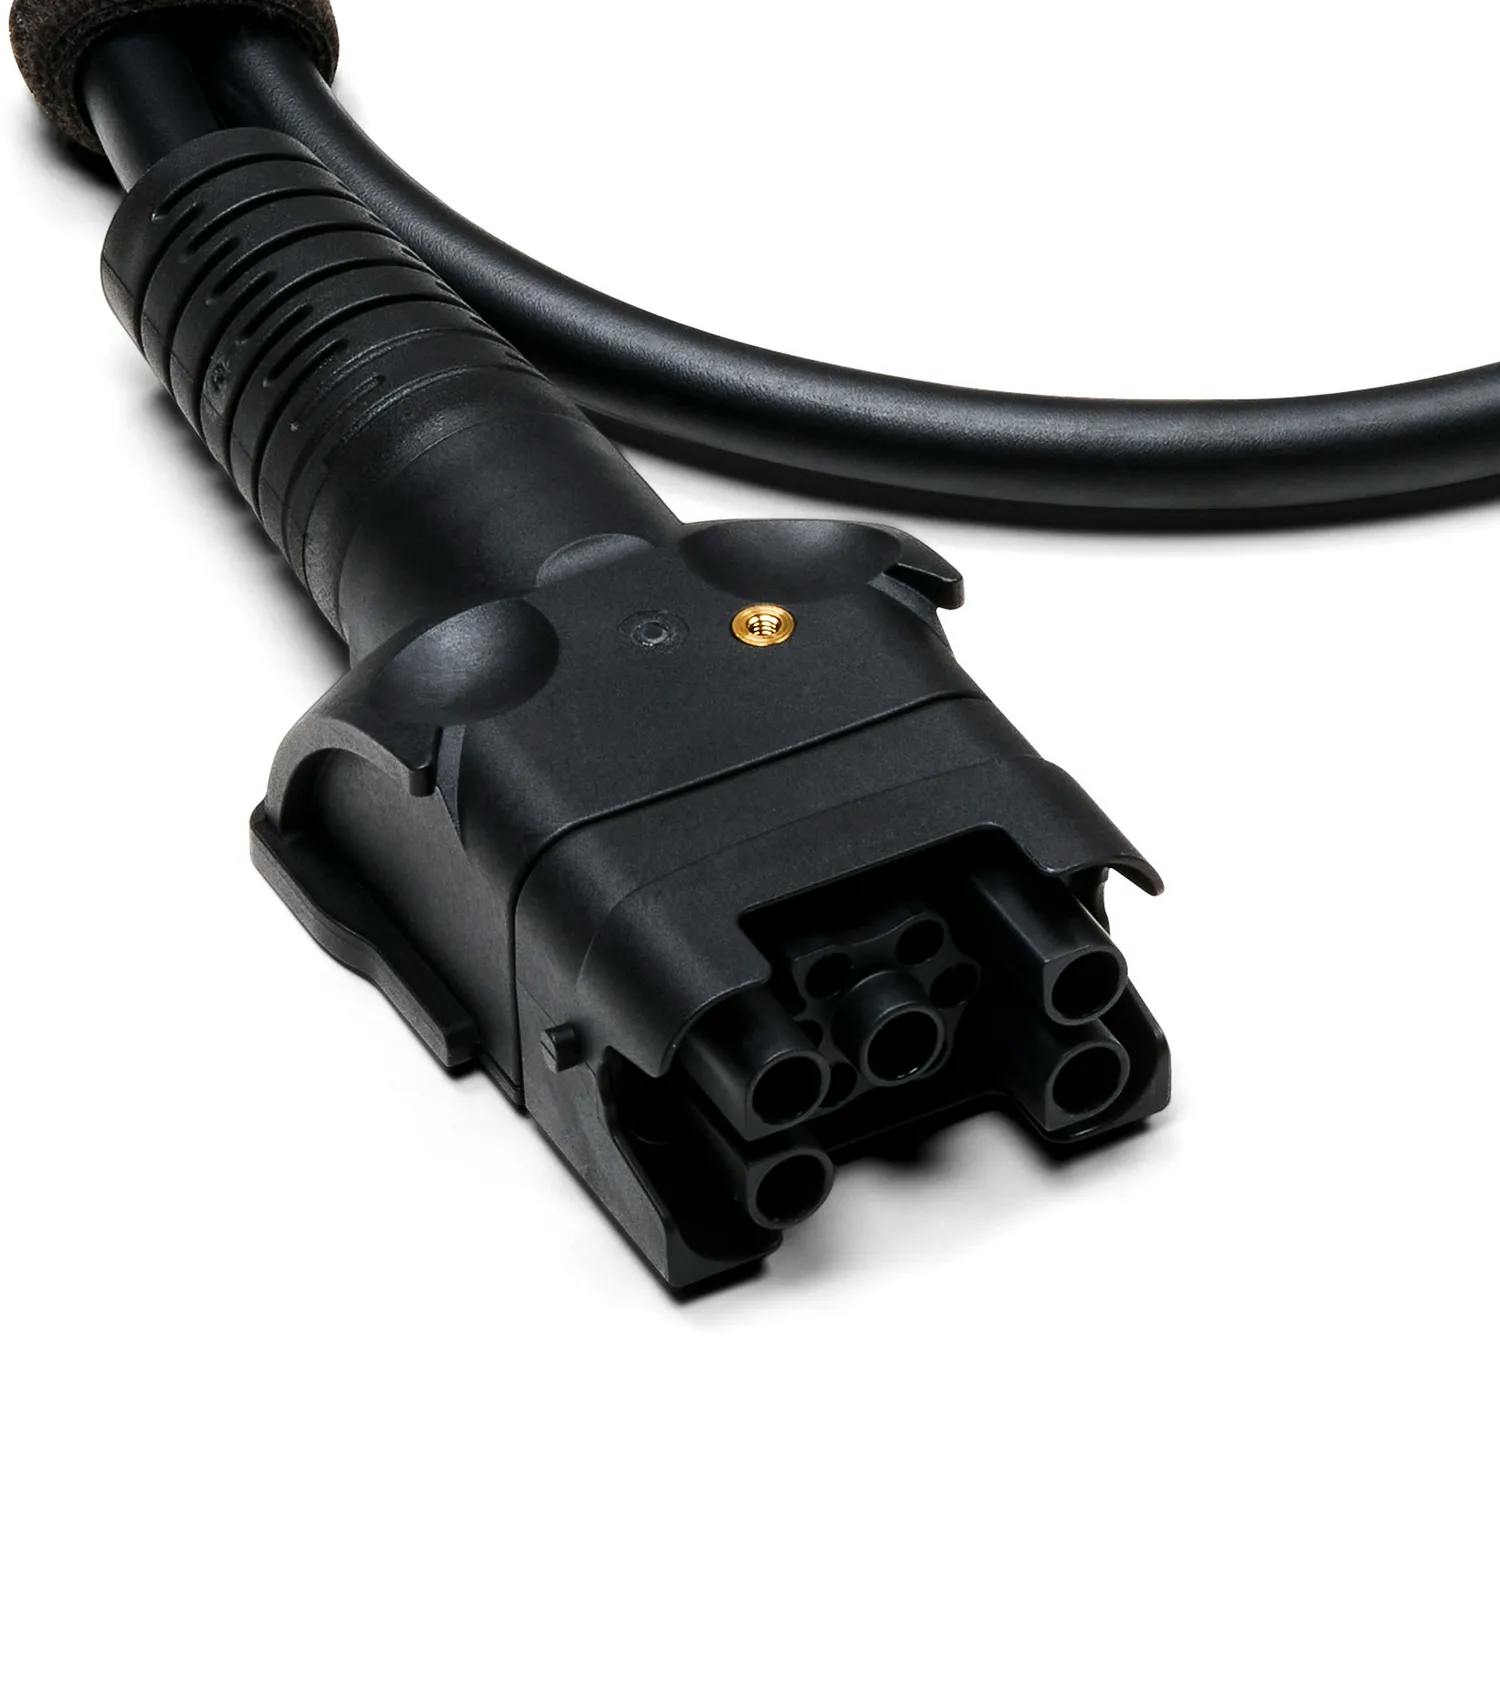 Charging cable (industrial electrical outlet) 3